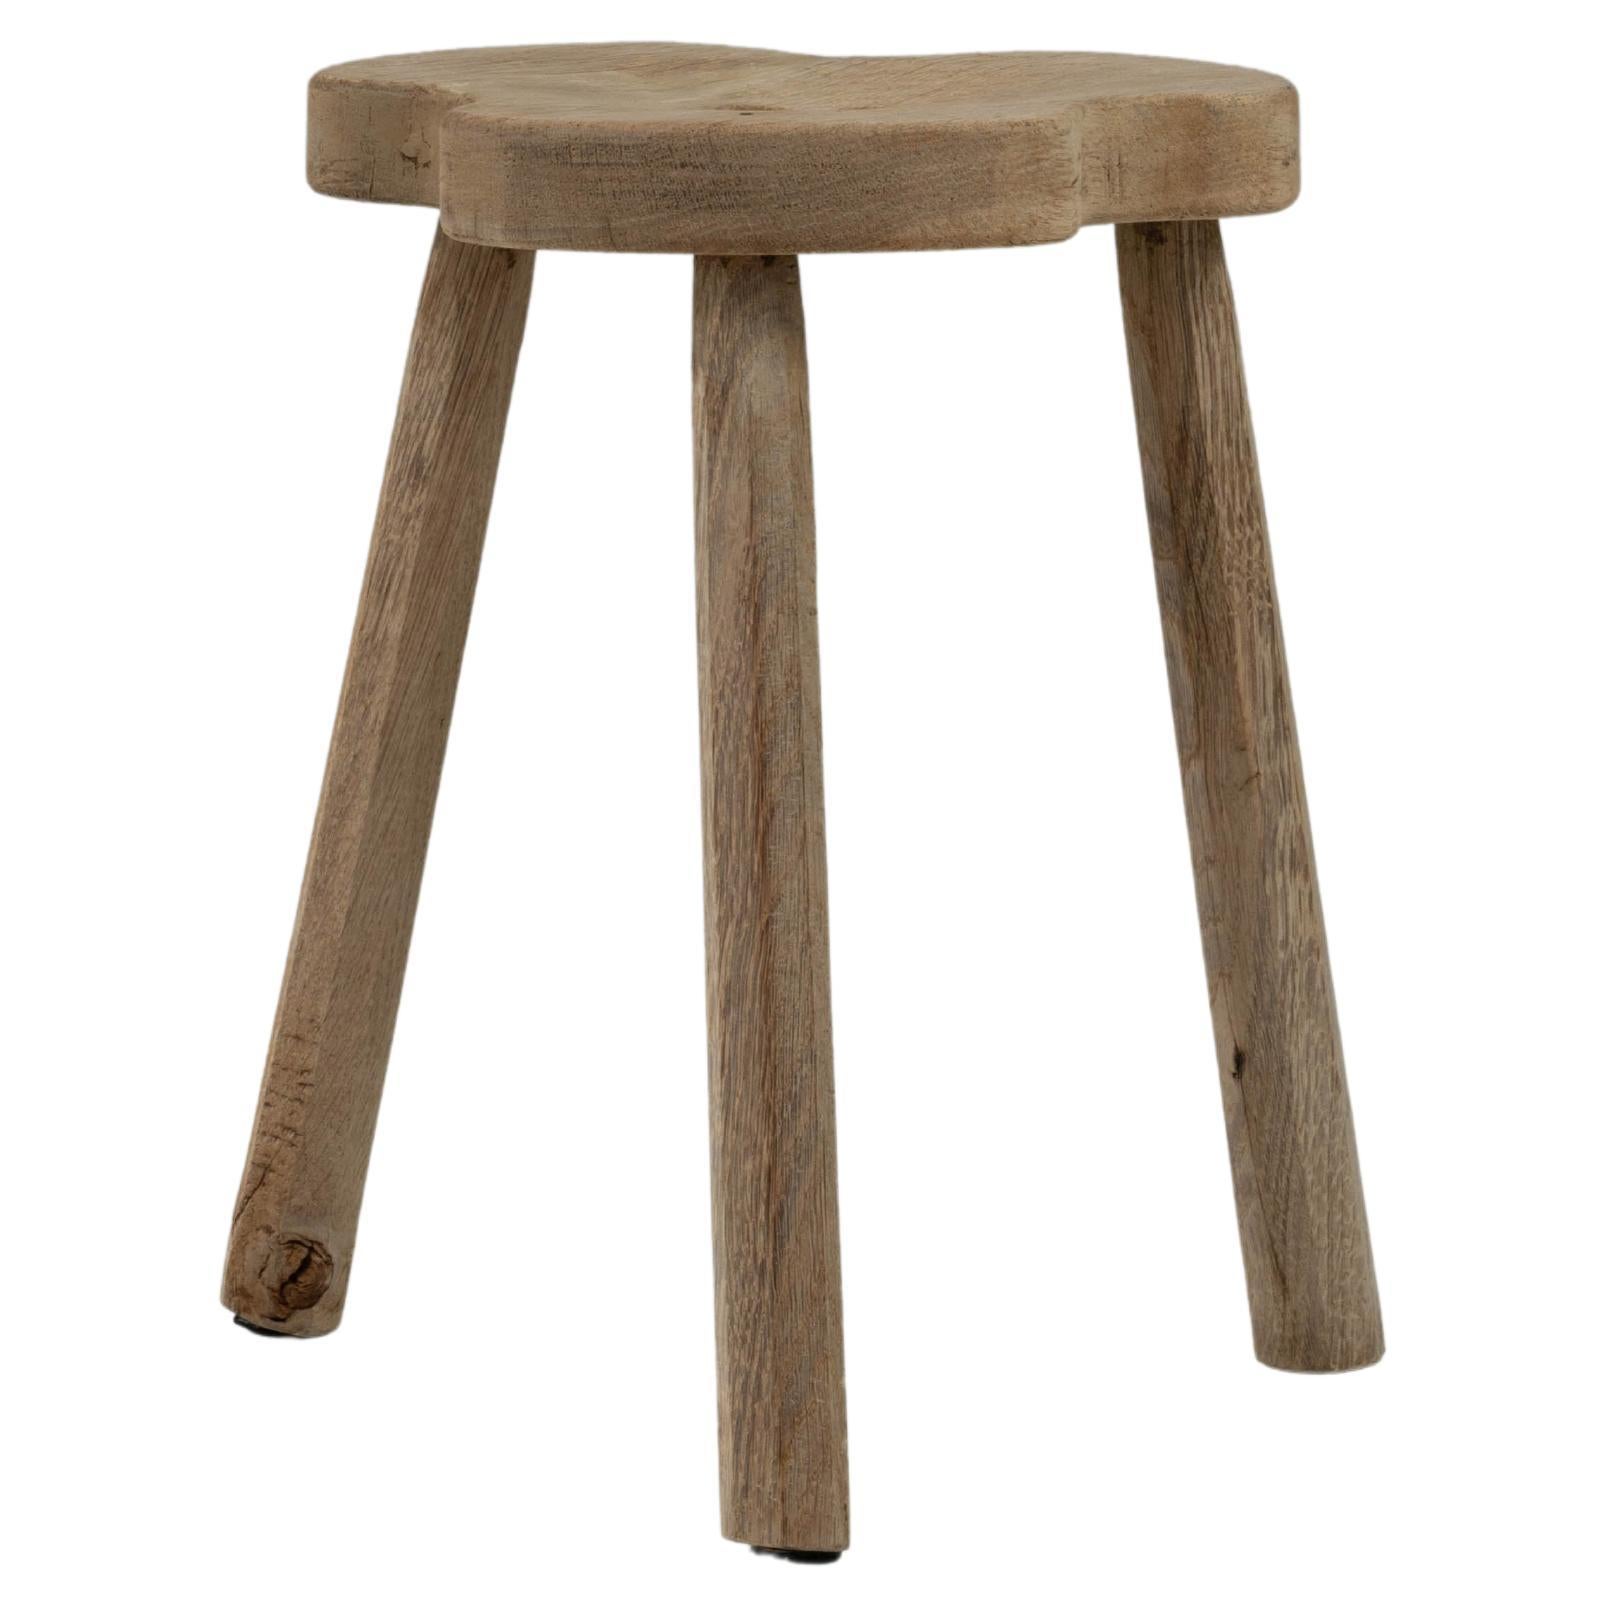 20th Century French Wooden Stool